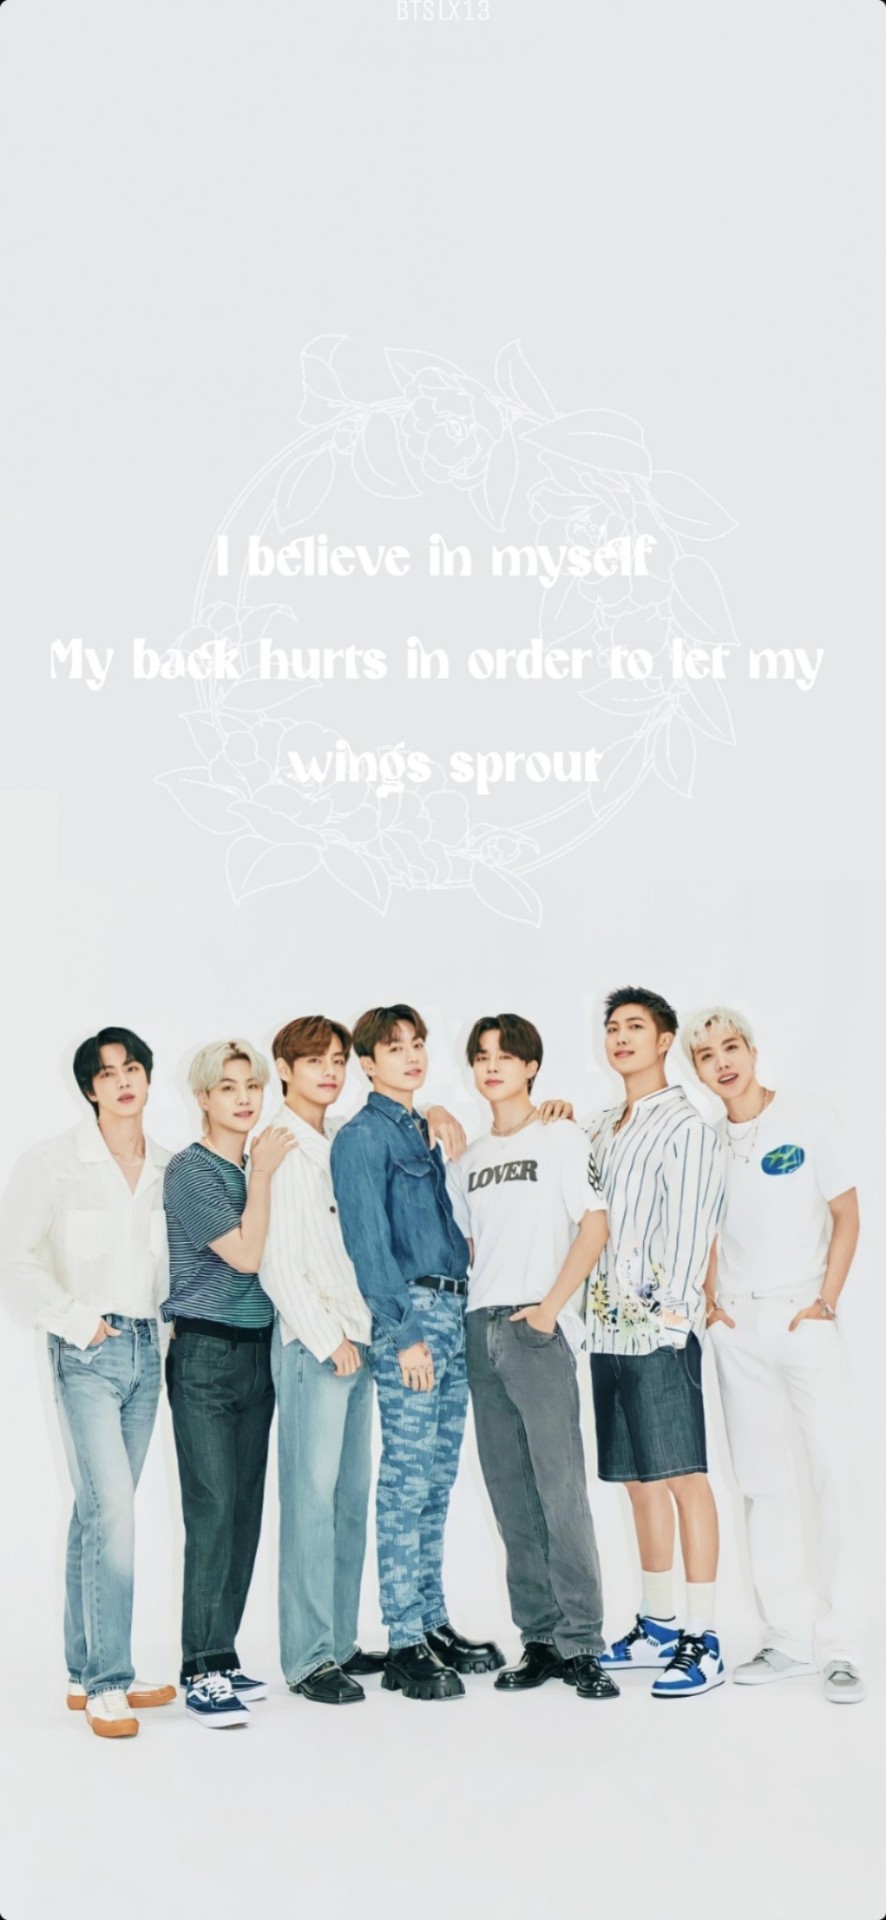 ] — Can I req some BTS lyrical wallpapers ☺️?!?!